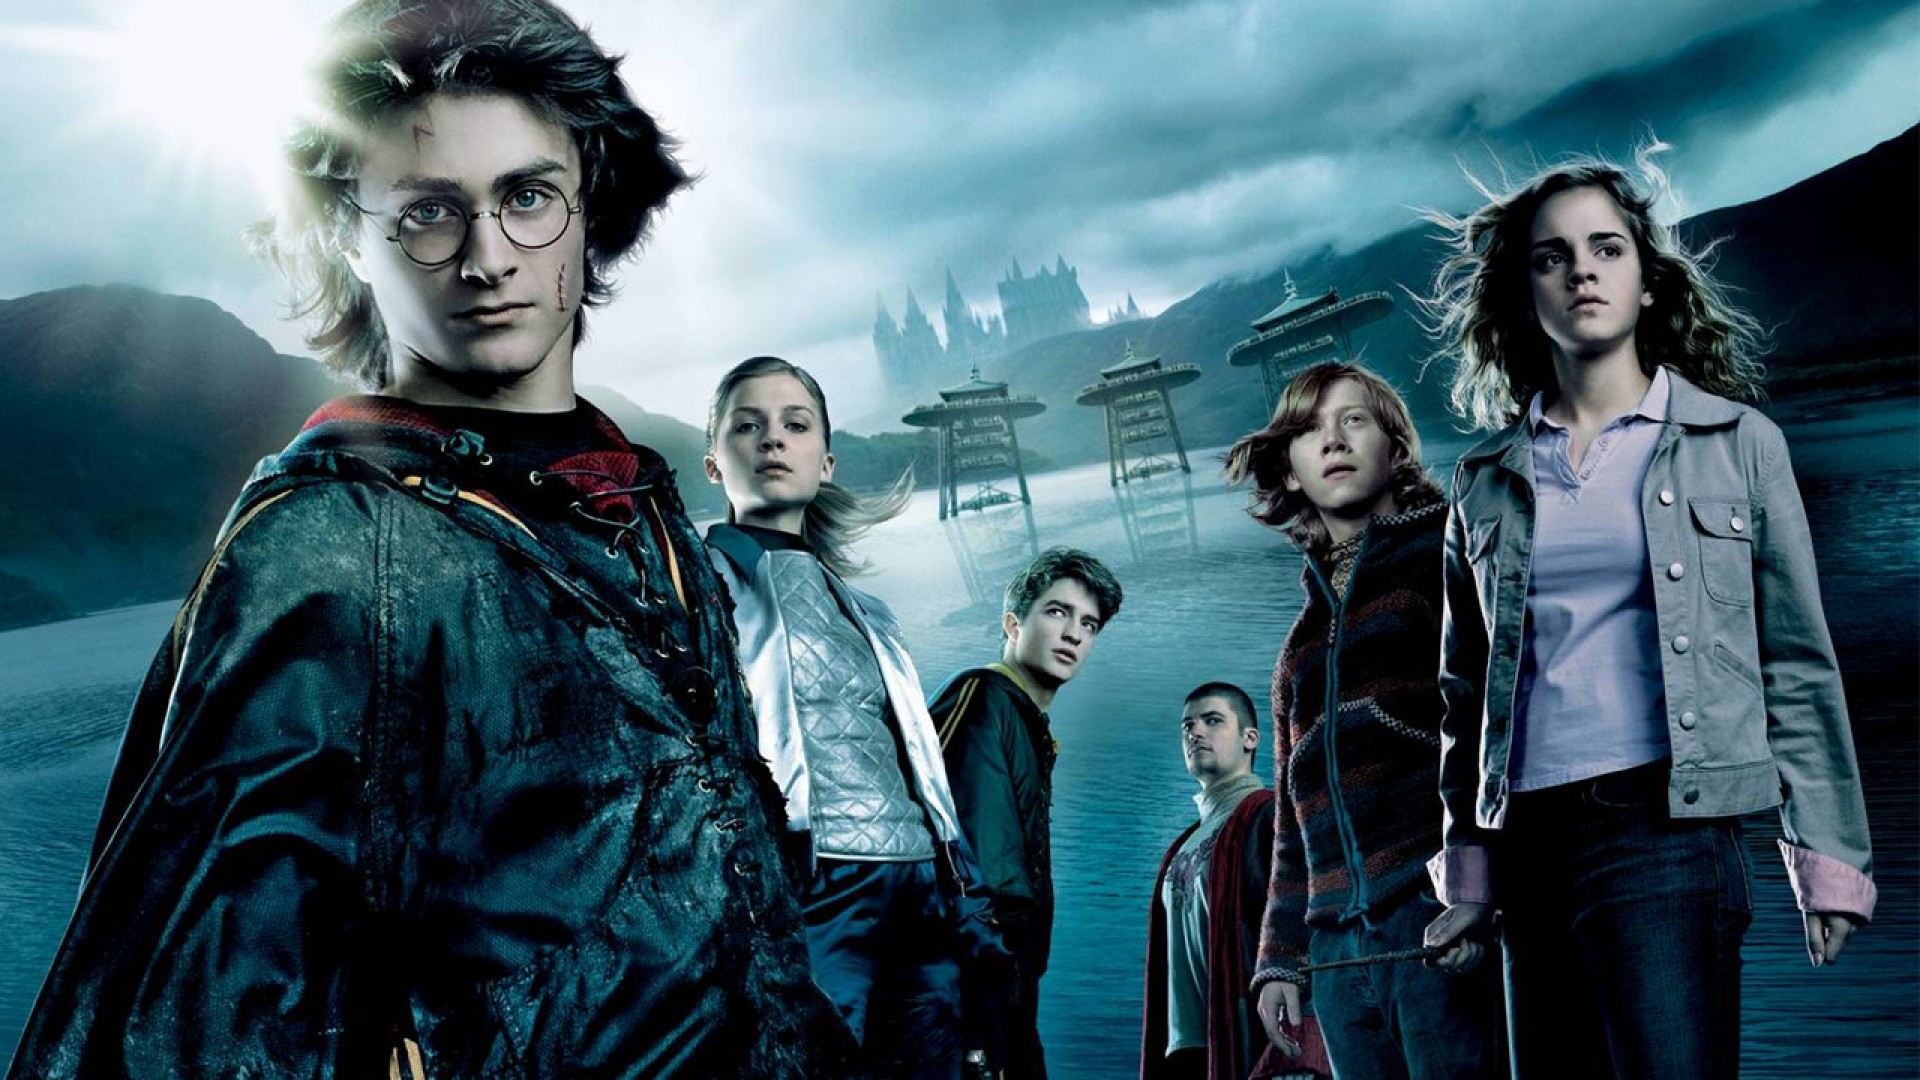 1920x1080  Wallpaper harry potter and the goblet of fire, main characters,  costume